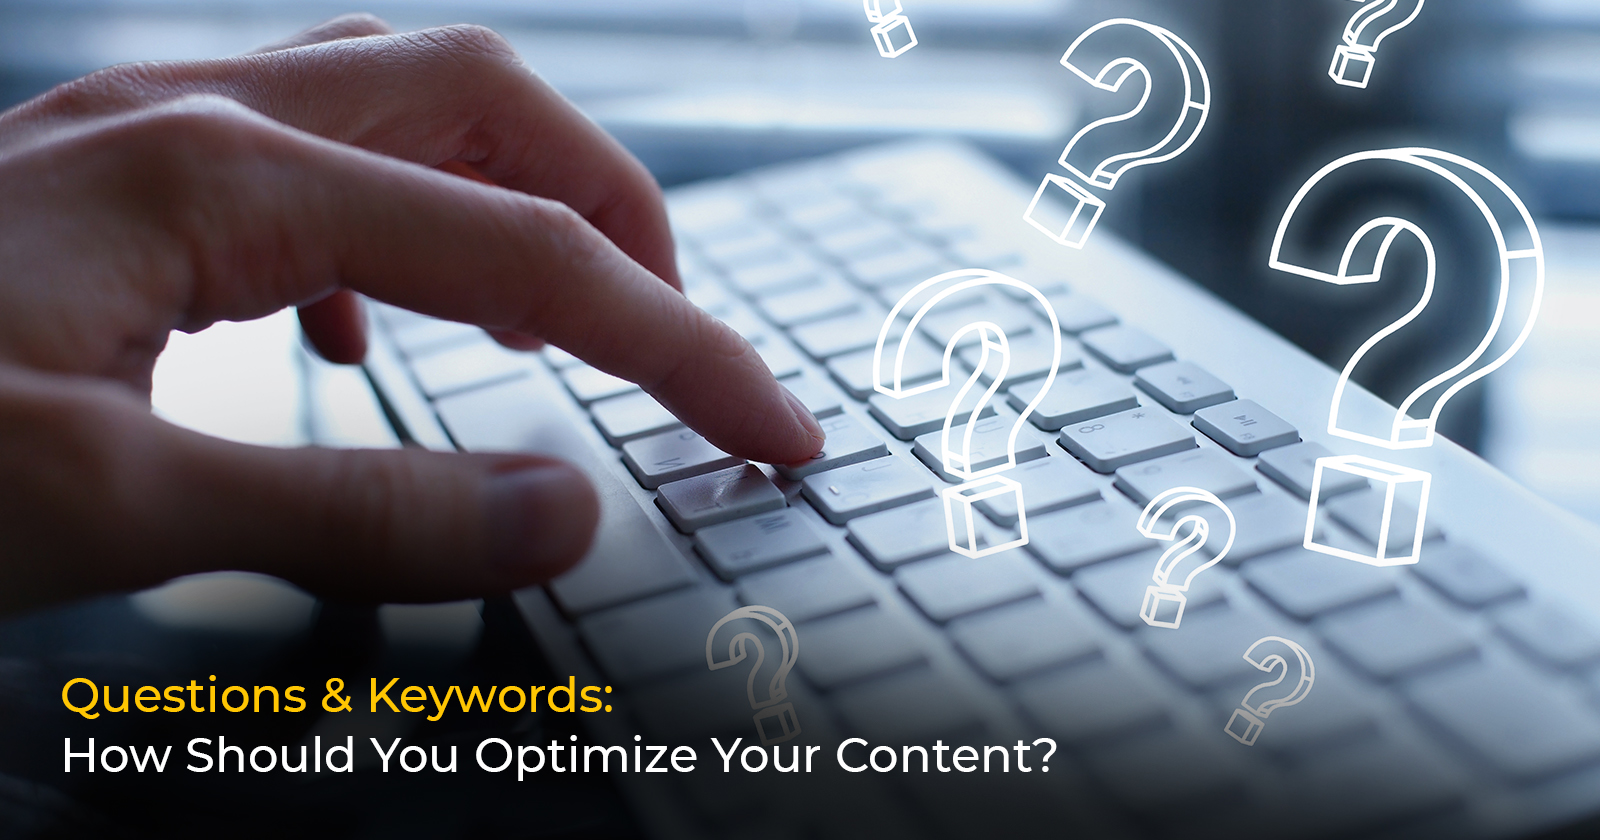 questions-keywords-how-should-you-optimize-your-content.jpg